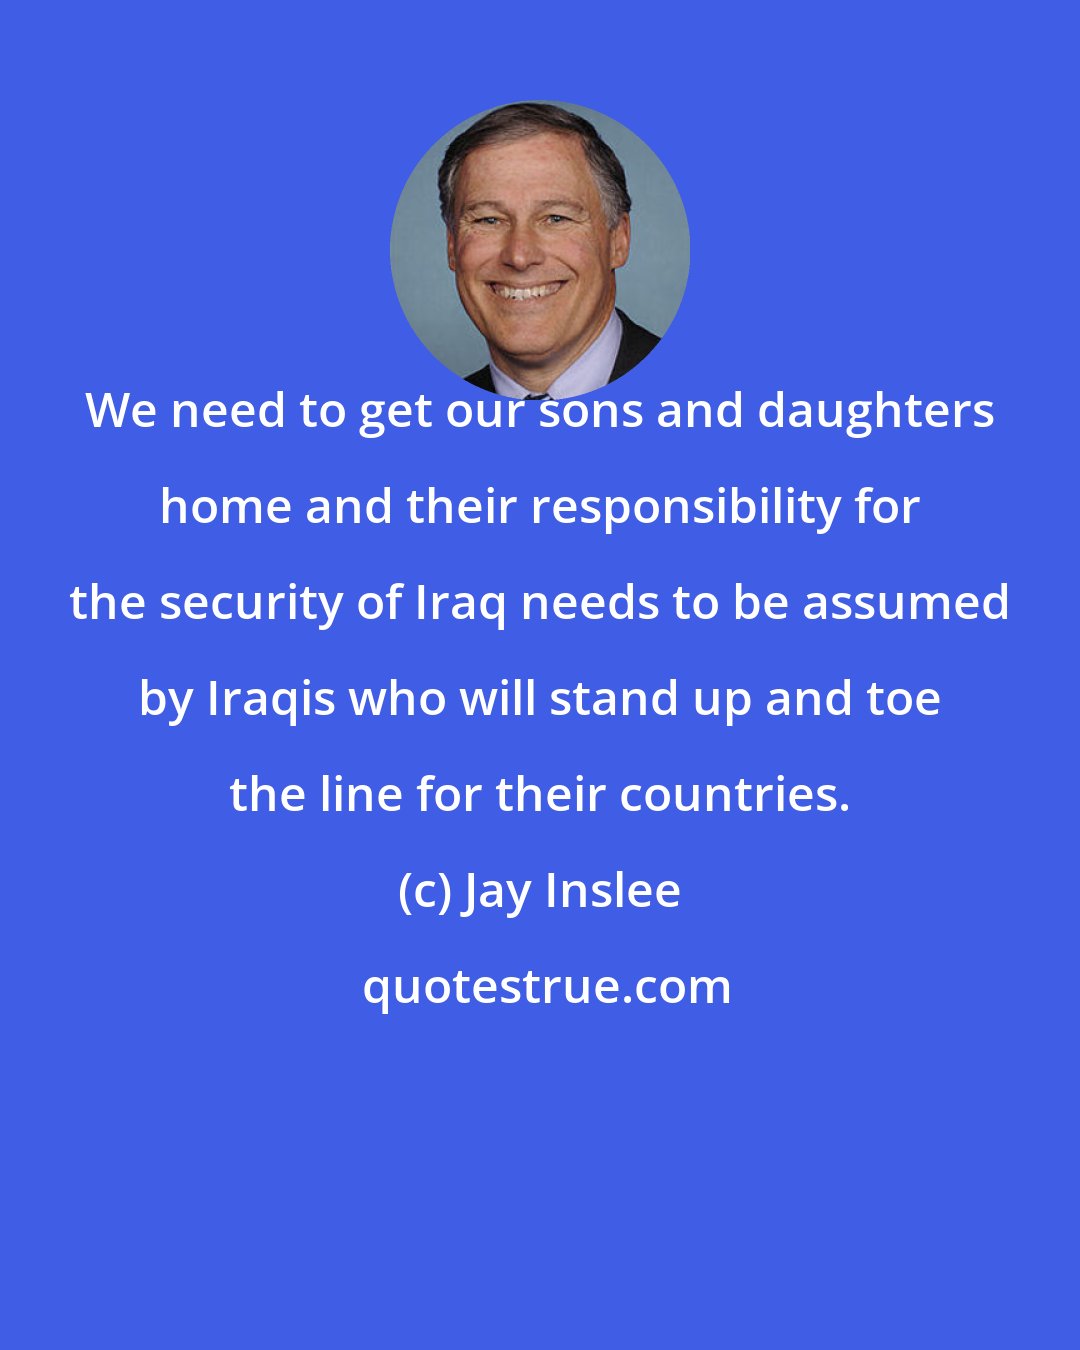 Jay Inslee: We need to get our sons and daughters home and their responsibility for the security of Iraq needs to be assumed by Iraqis who will stand up and toe the line for their countries.